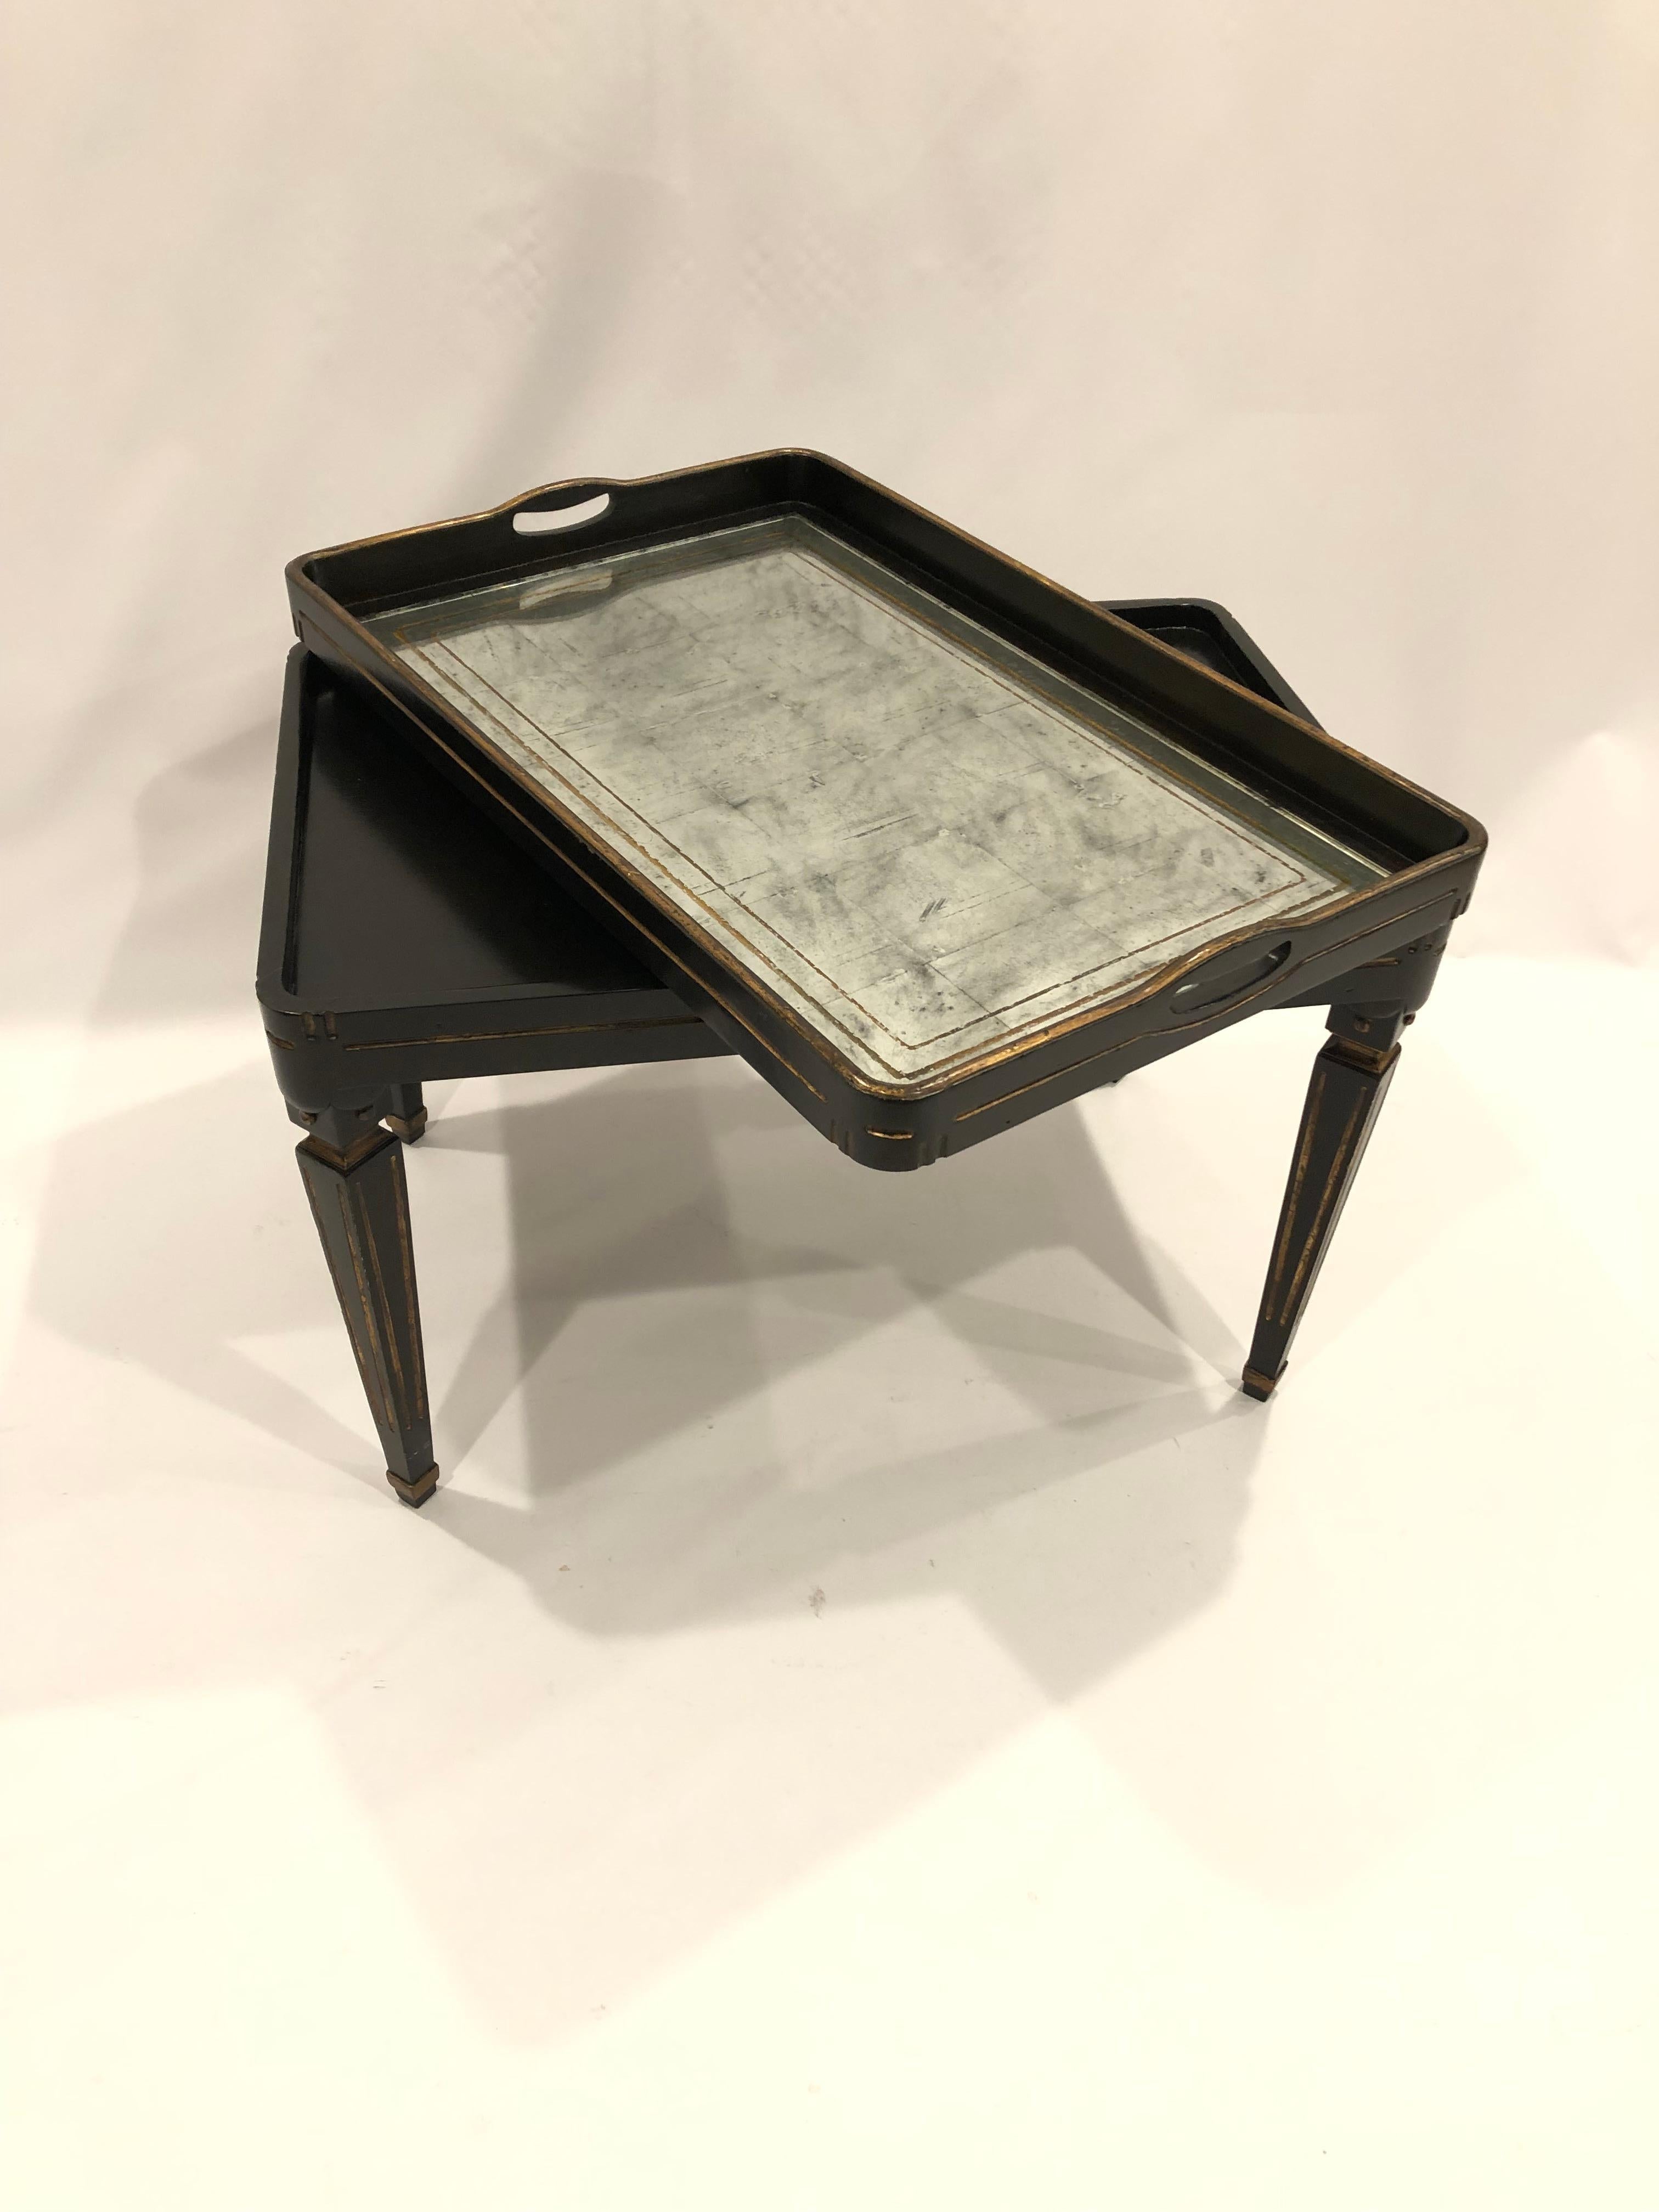 A handsome small rectangular coffee table having removeable tray top with inset aged mirror having gold outline around the periphery. Base and gallery of the table are ebonized to make a glamorous contrast to the eglomise top. Legs are equally